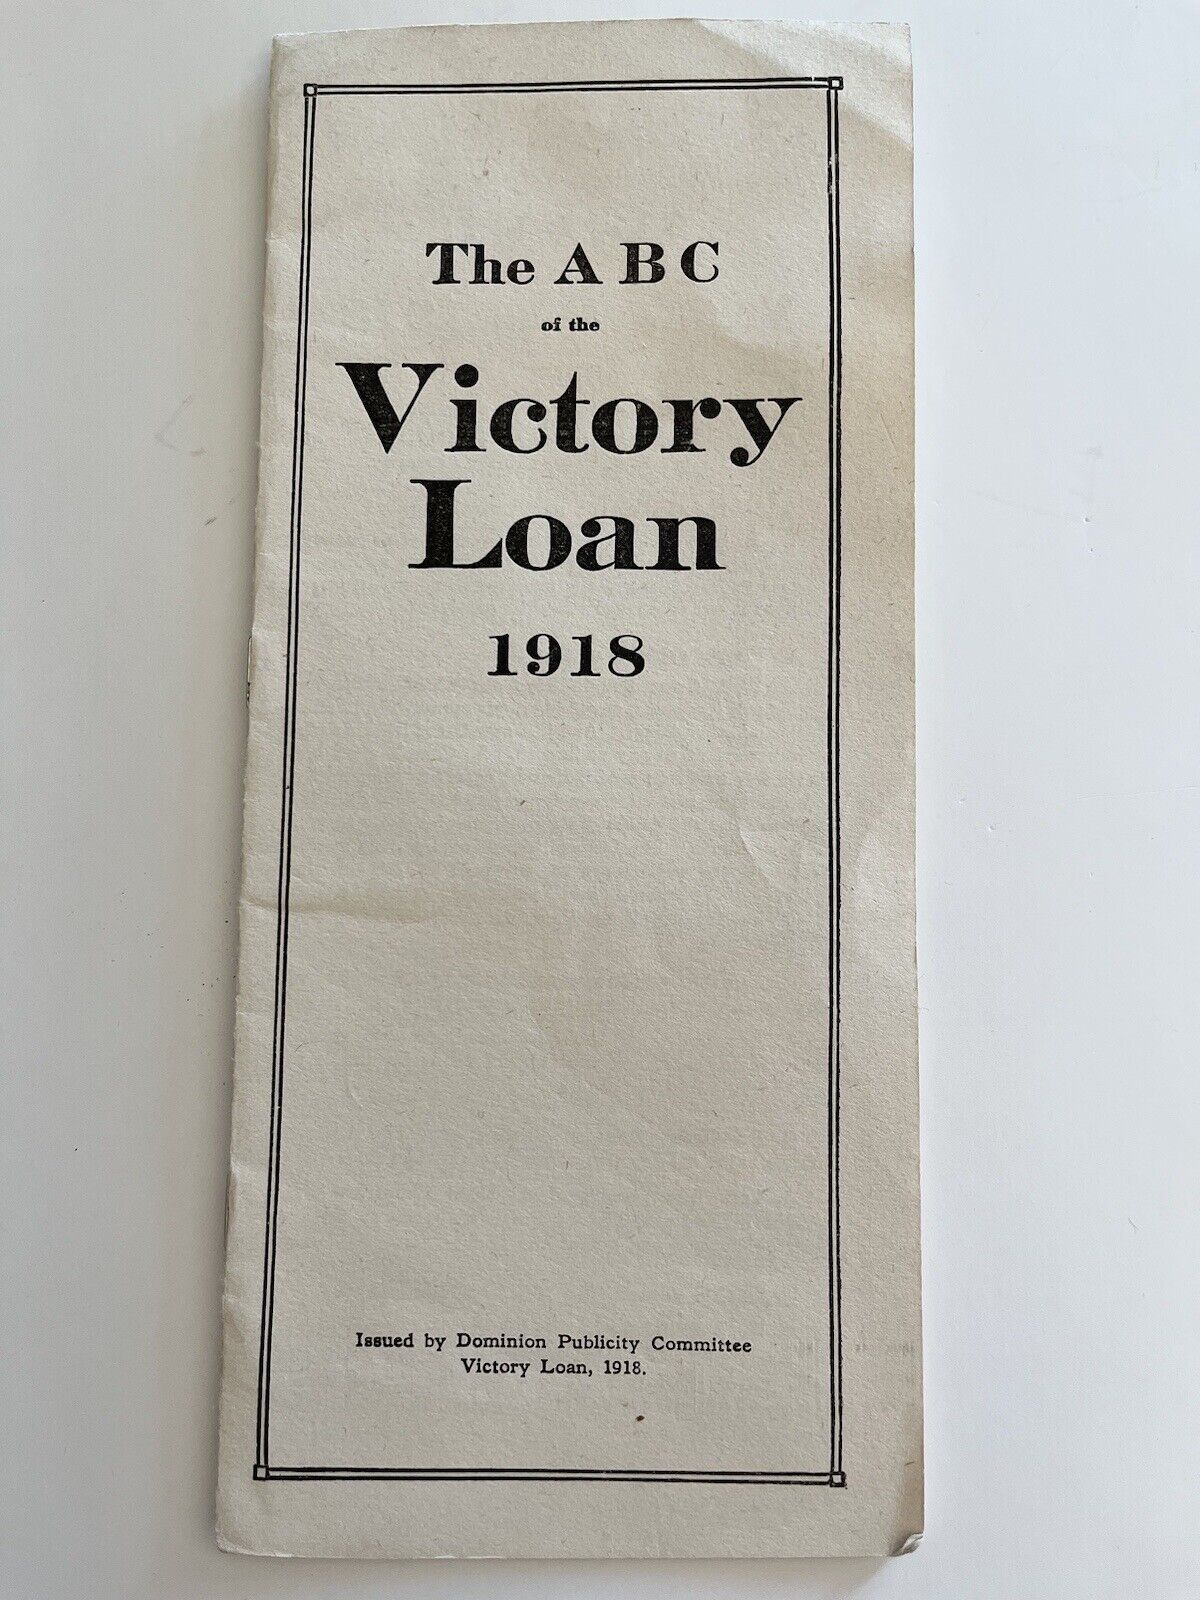 The ABC of the Victory Loan 1918 Iss by Dominion Publicity Committee Ephemera